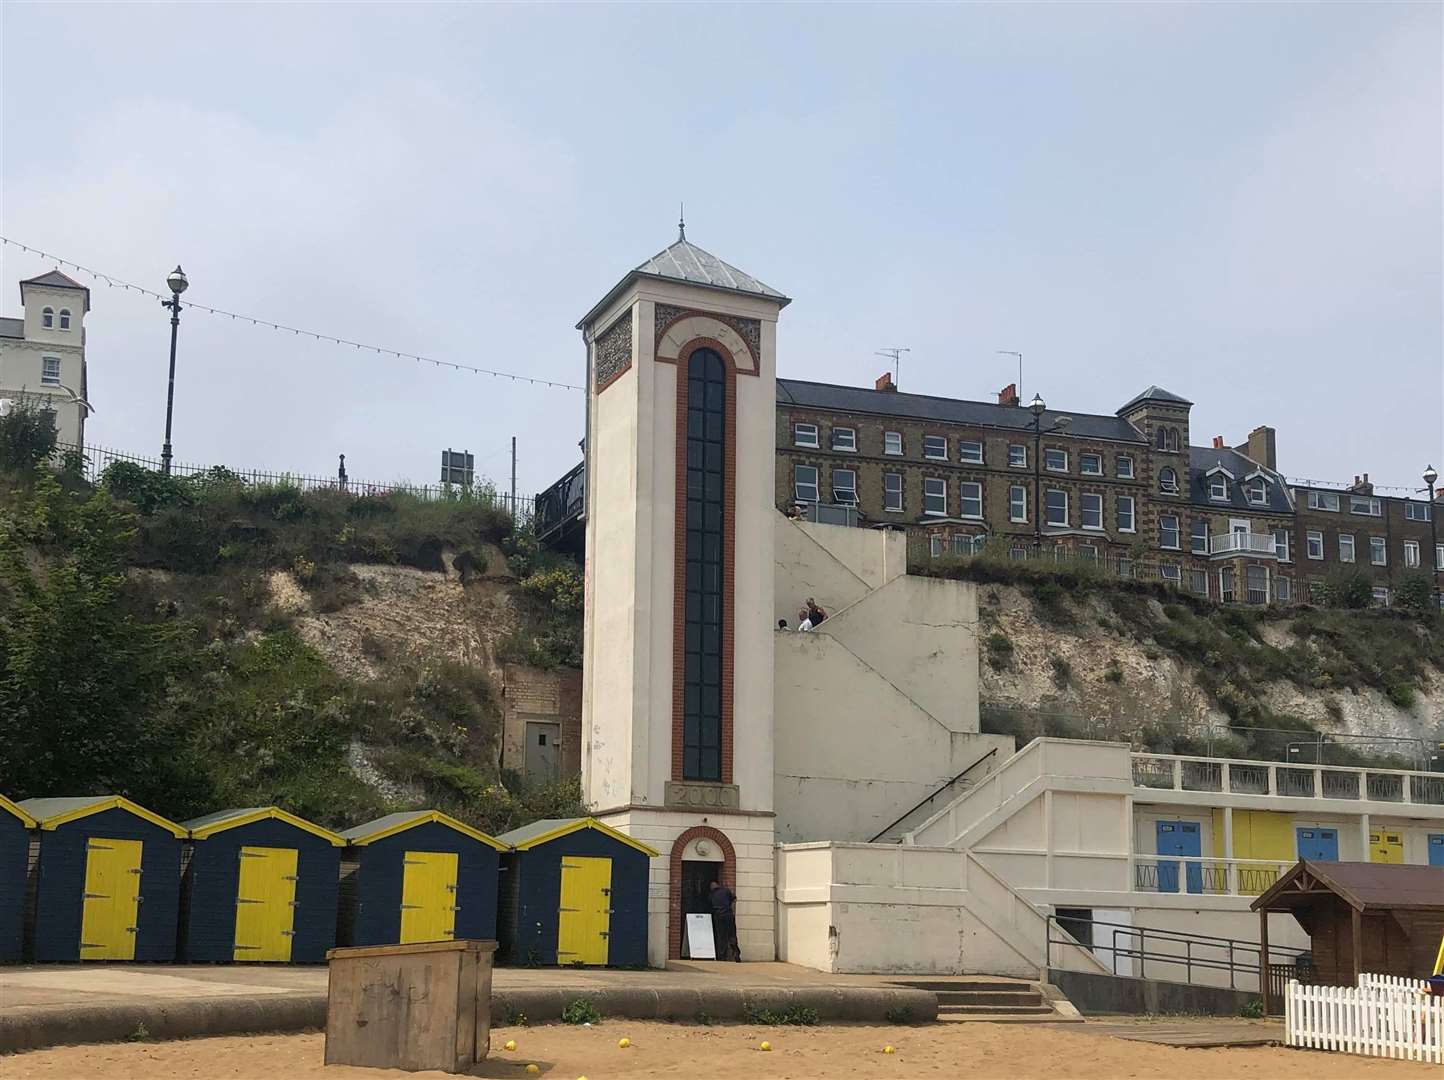 Viking Bay lift in Broadstairs remains closed